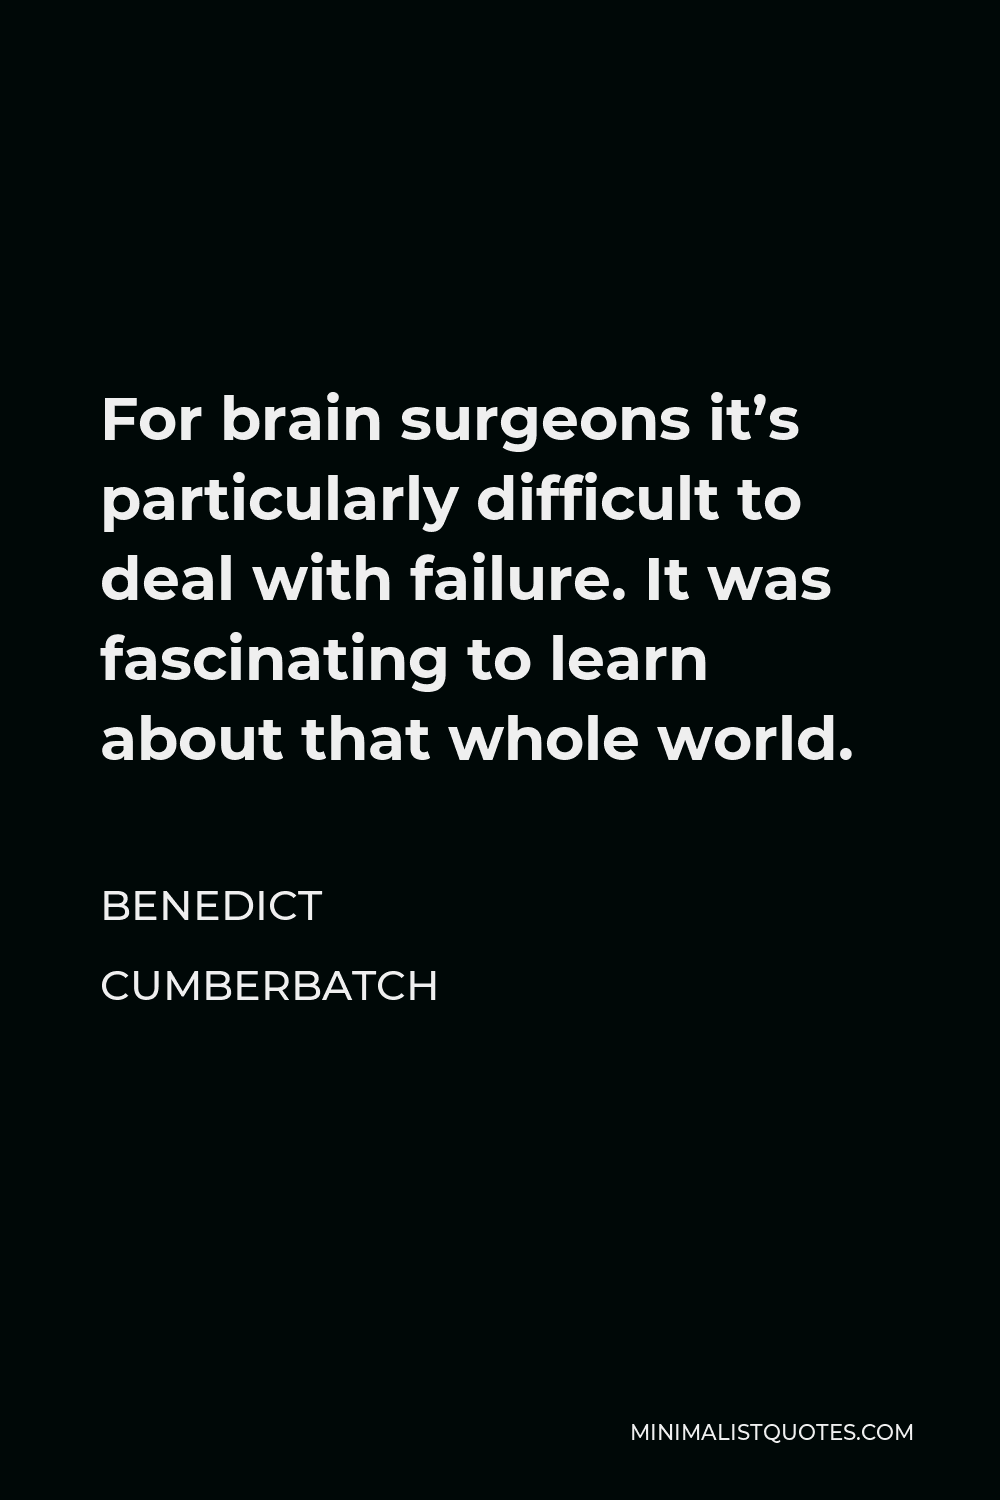 Benedict Cumberbatch Quote - For brain surgeons it’s particularly difficult to deal with failure. It was fascinating to learn about that whole world.